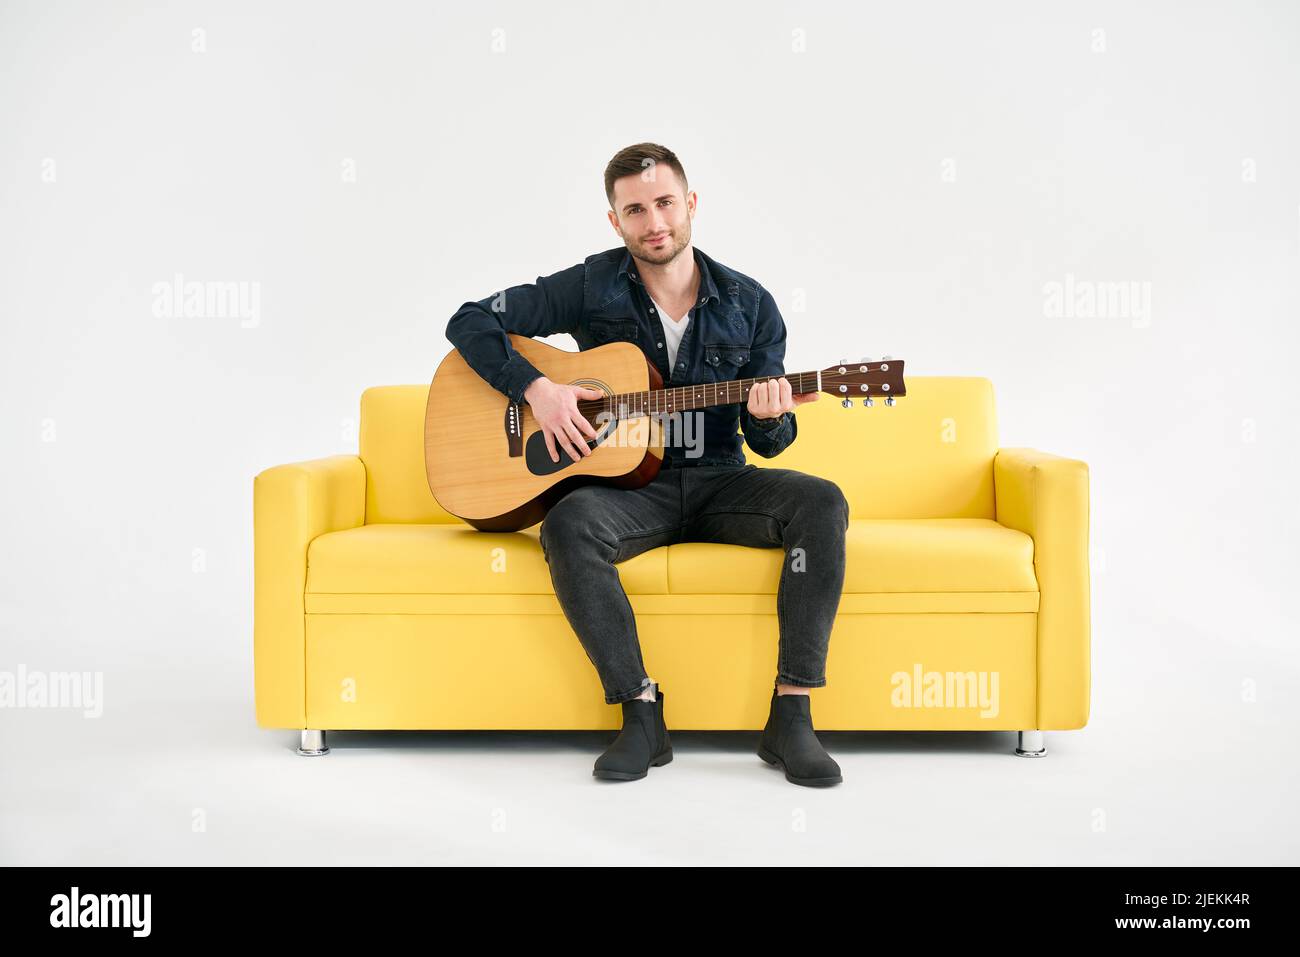 Handsome young man playing acoustic guitar whlile sitting on yellow sofa over white background. Hobby, music concept Stock Photo